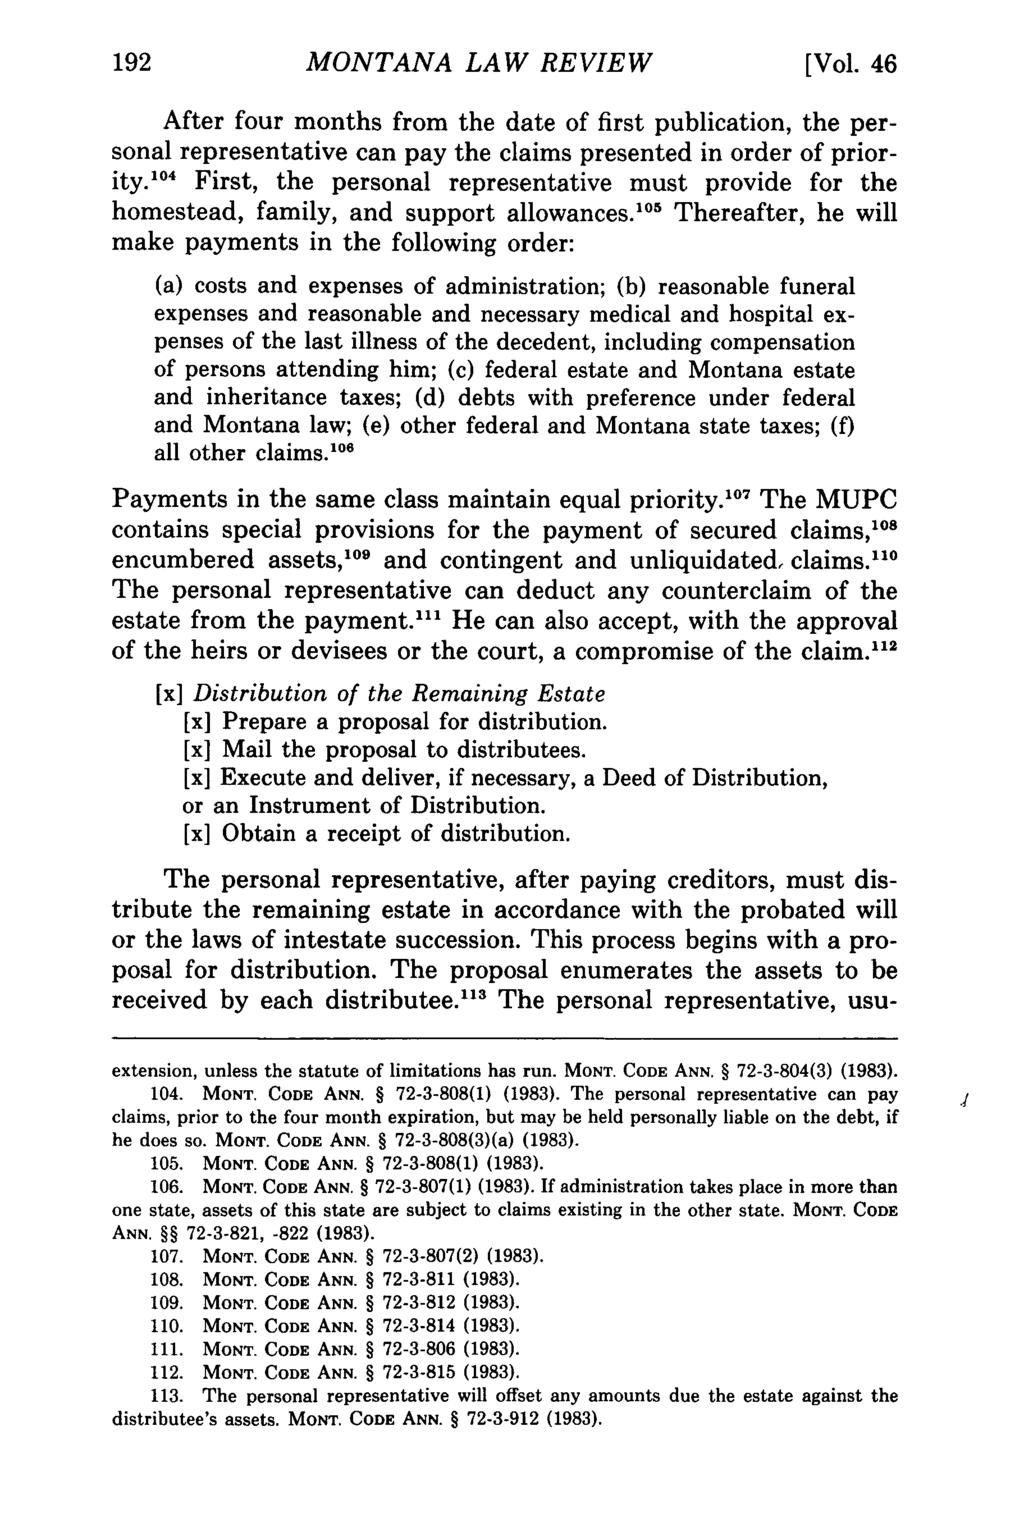 MONTANA Montana Law Review, LAW Vol. 46 REVIEW [1985], Iss. 1, Art. 8 [Vol.